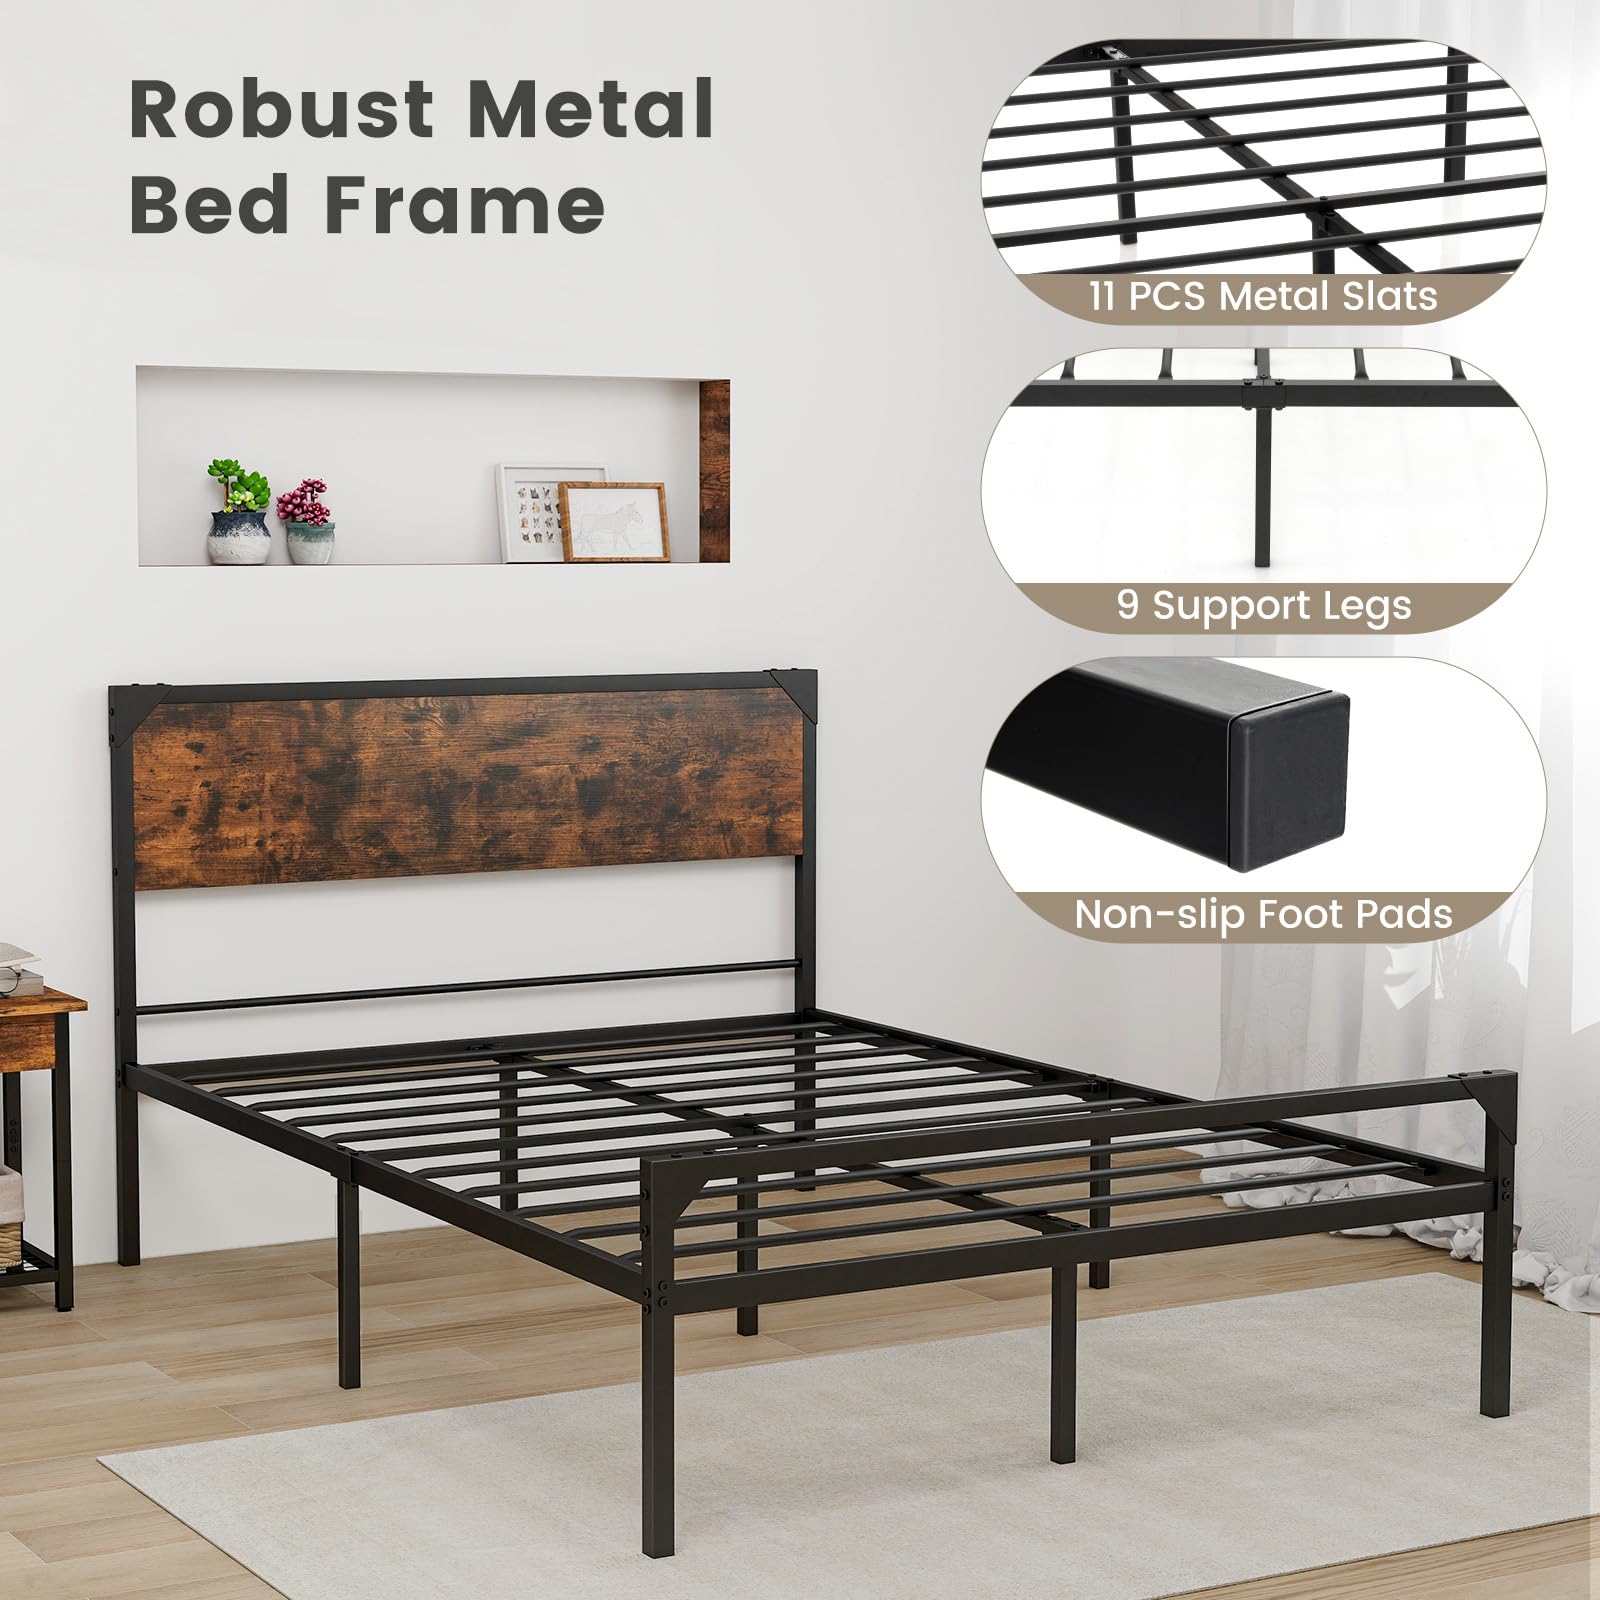 Giantex Full Size Bed Frame with Rustic Headboard & Footboard, Strong Metal Slat Support Mattress Foundation